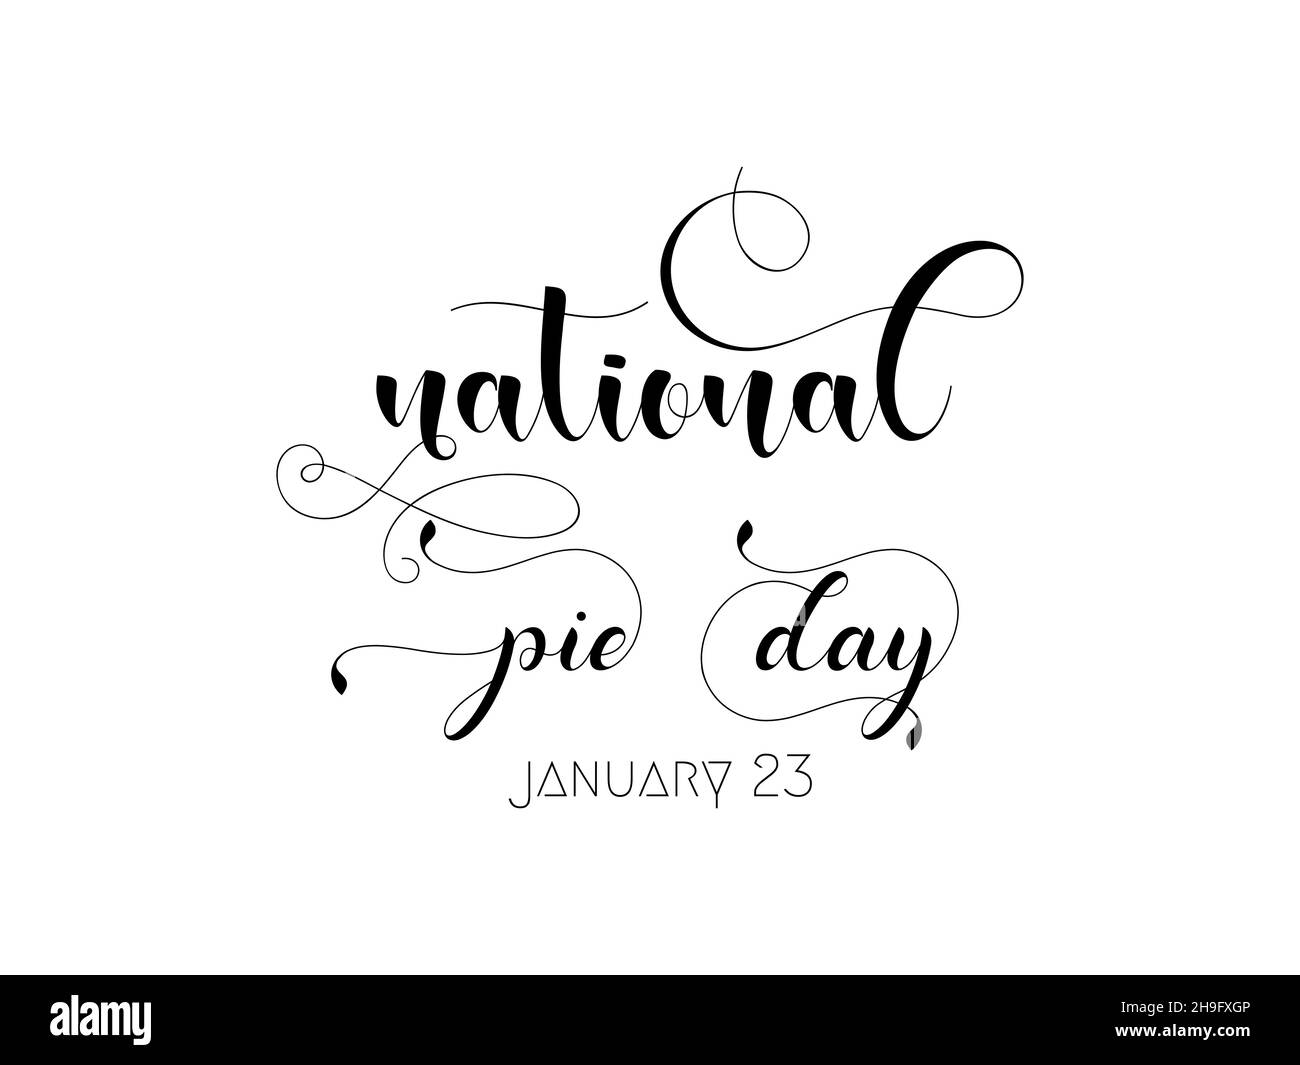 January 23 - Pie day. Calligraphy style hand lettering design for National pie day. Awareness design for banner, poster, tshirt, card. Stock Vector